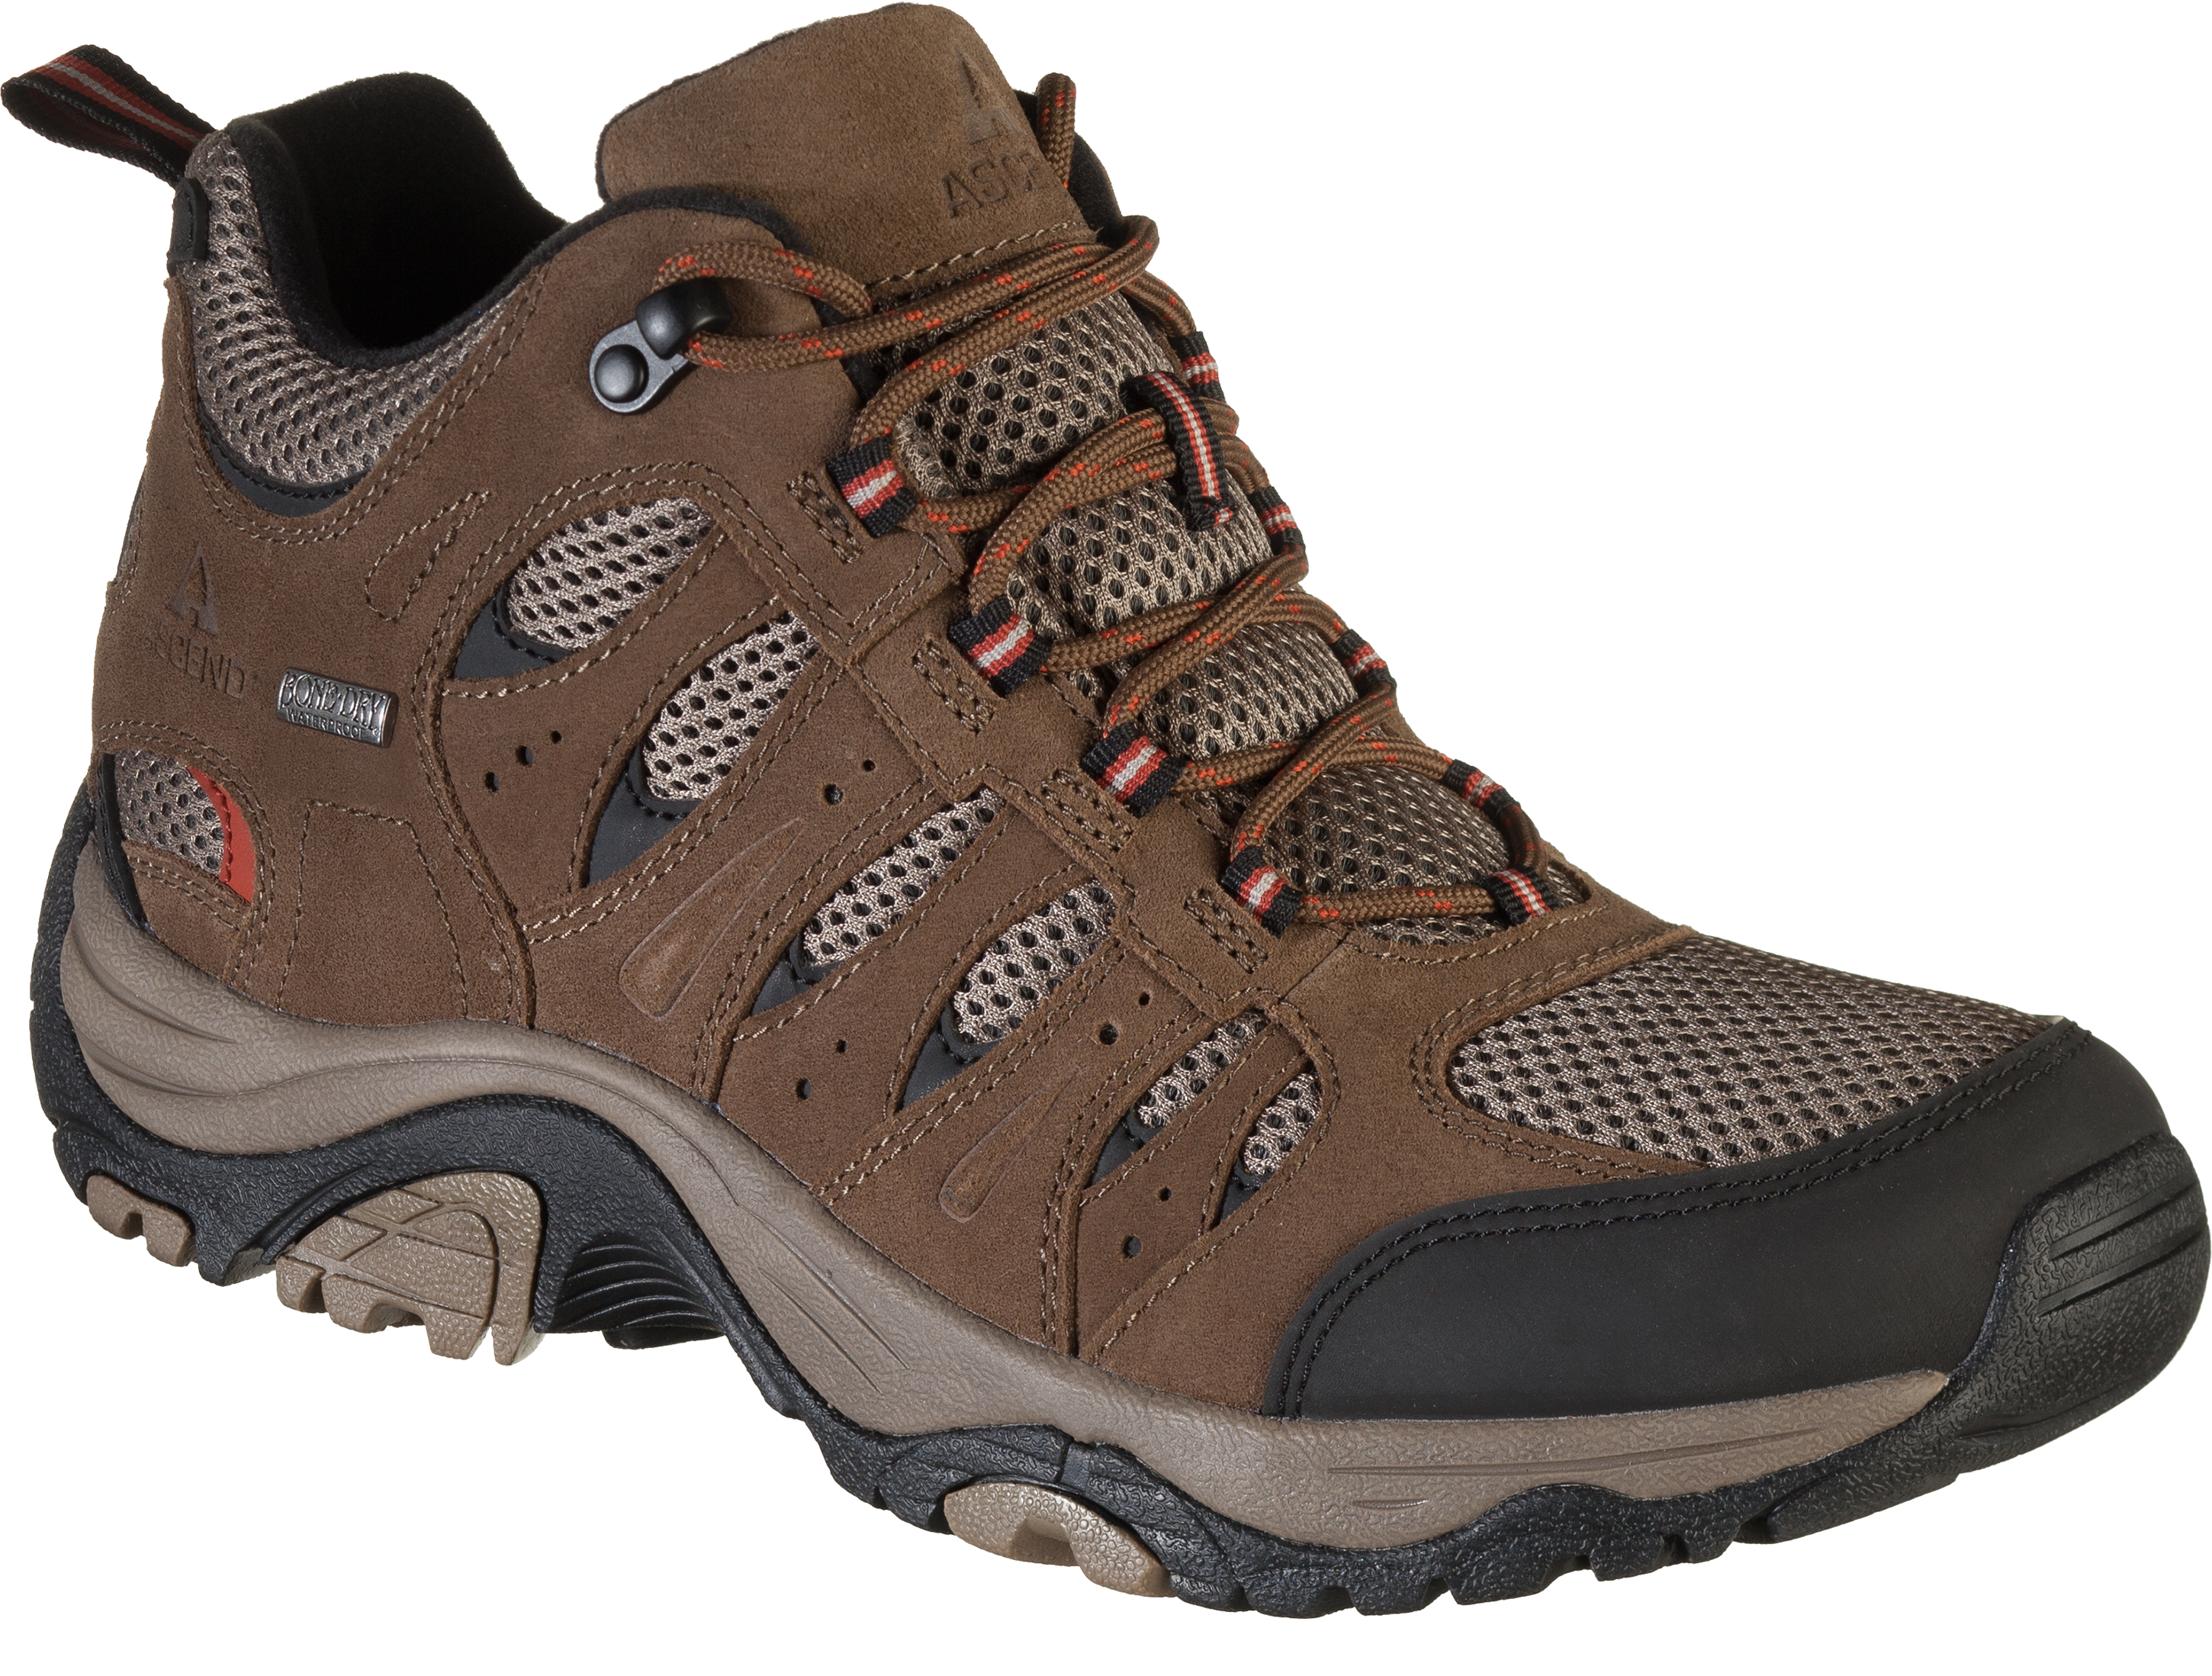 Ascend Lisco Mid Waterproof Hiking Boots for Men - Chocolate - 8M